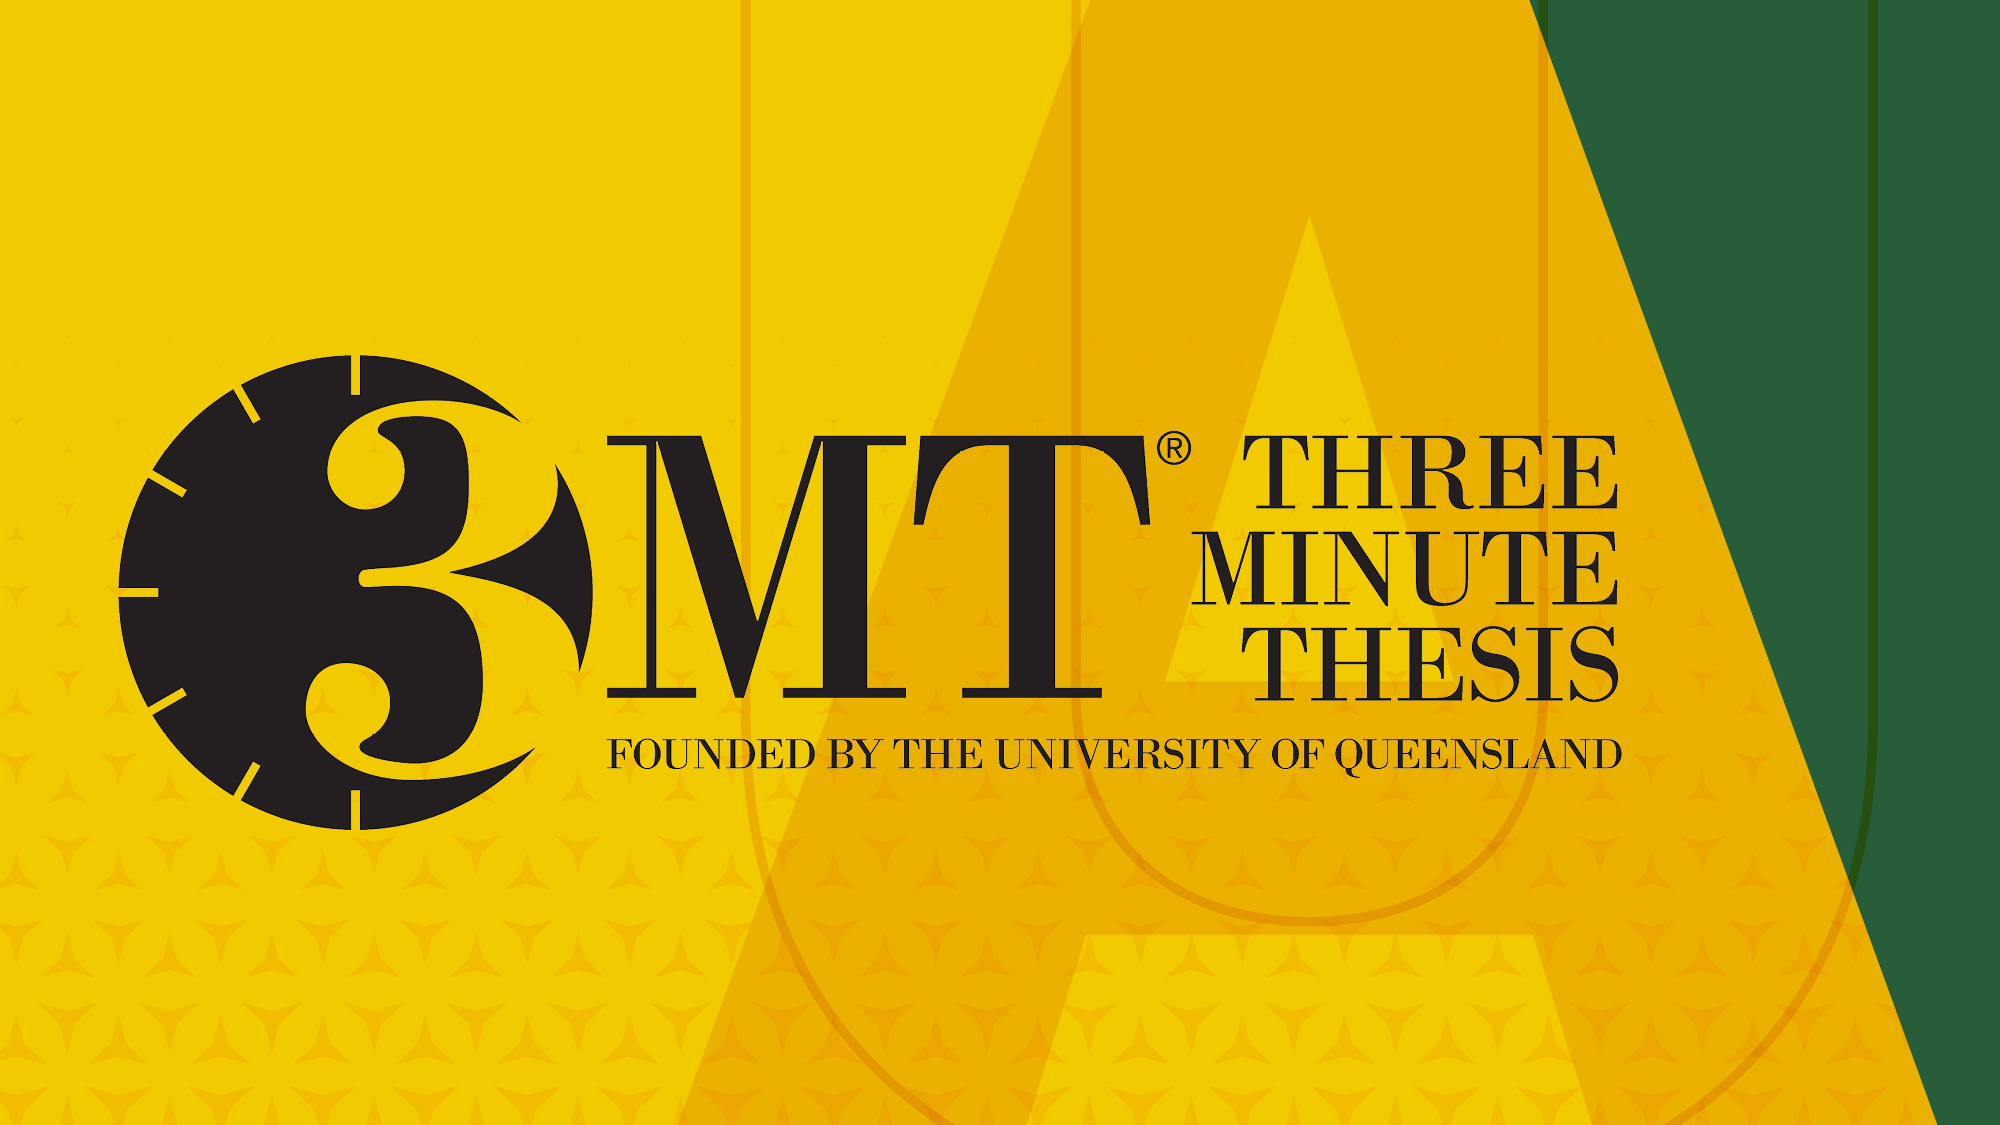 3mt Three Minute Thesis Founded by the University of Queensland